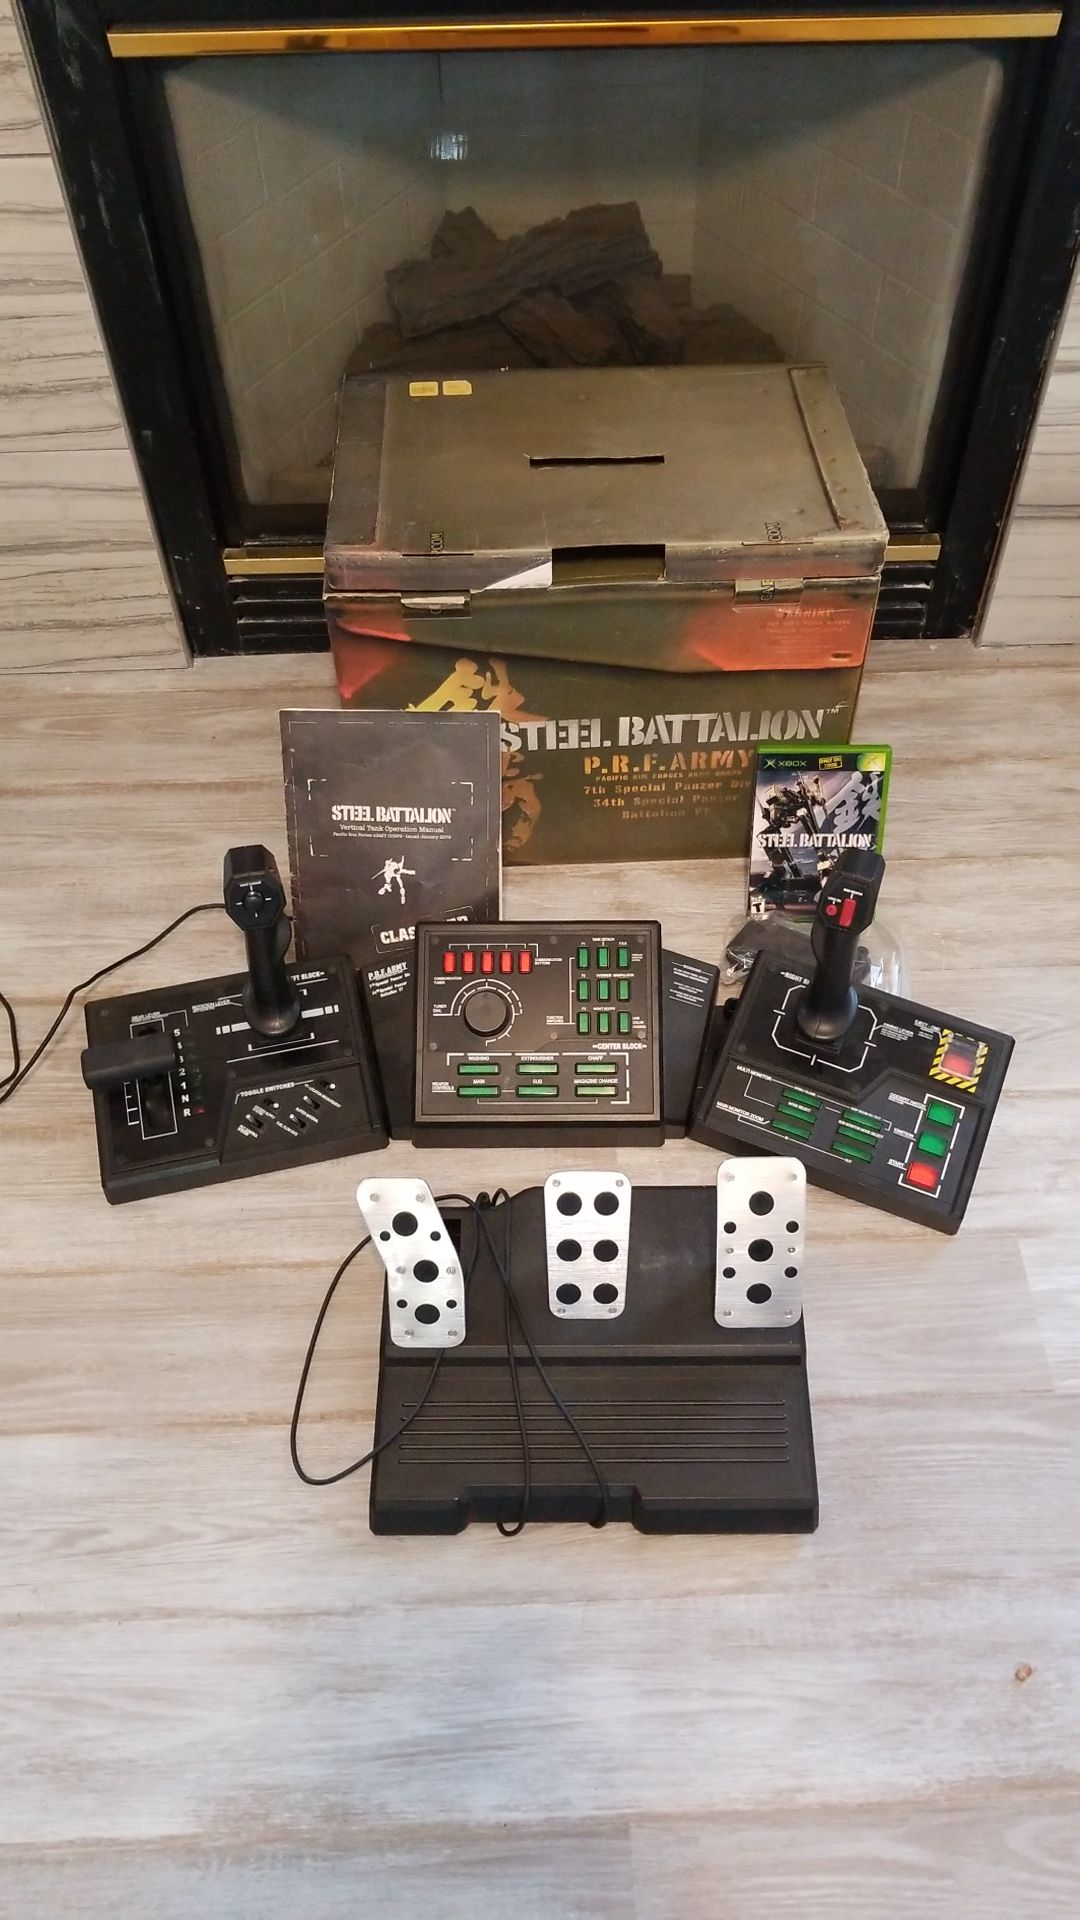 Steel Battalion - with controller